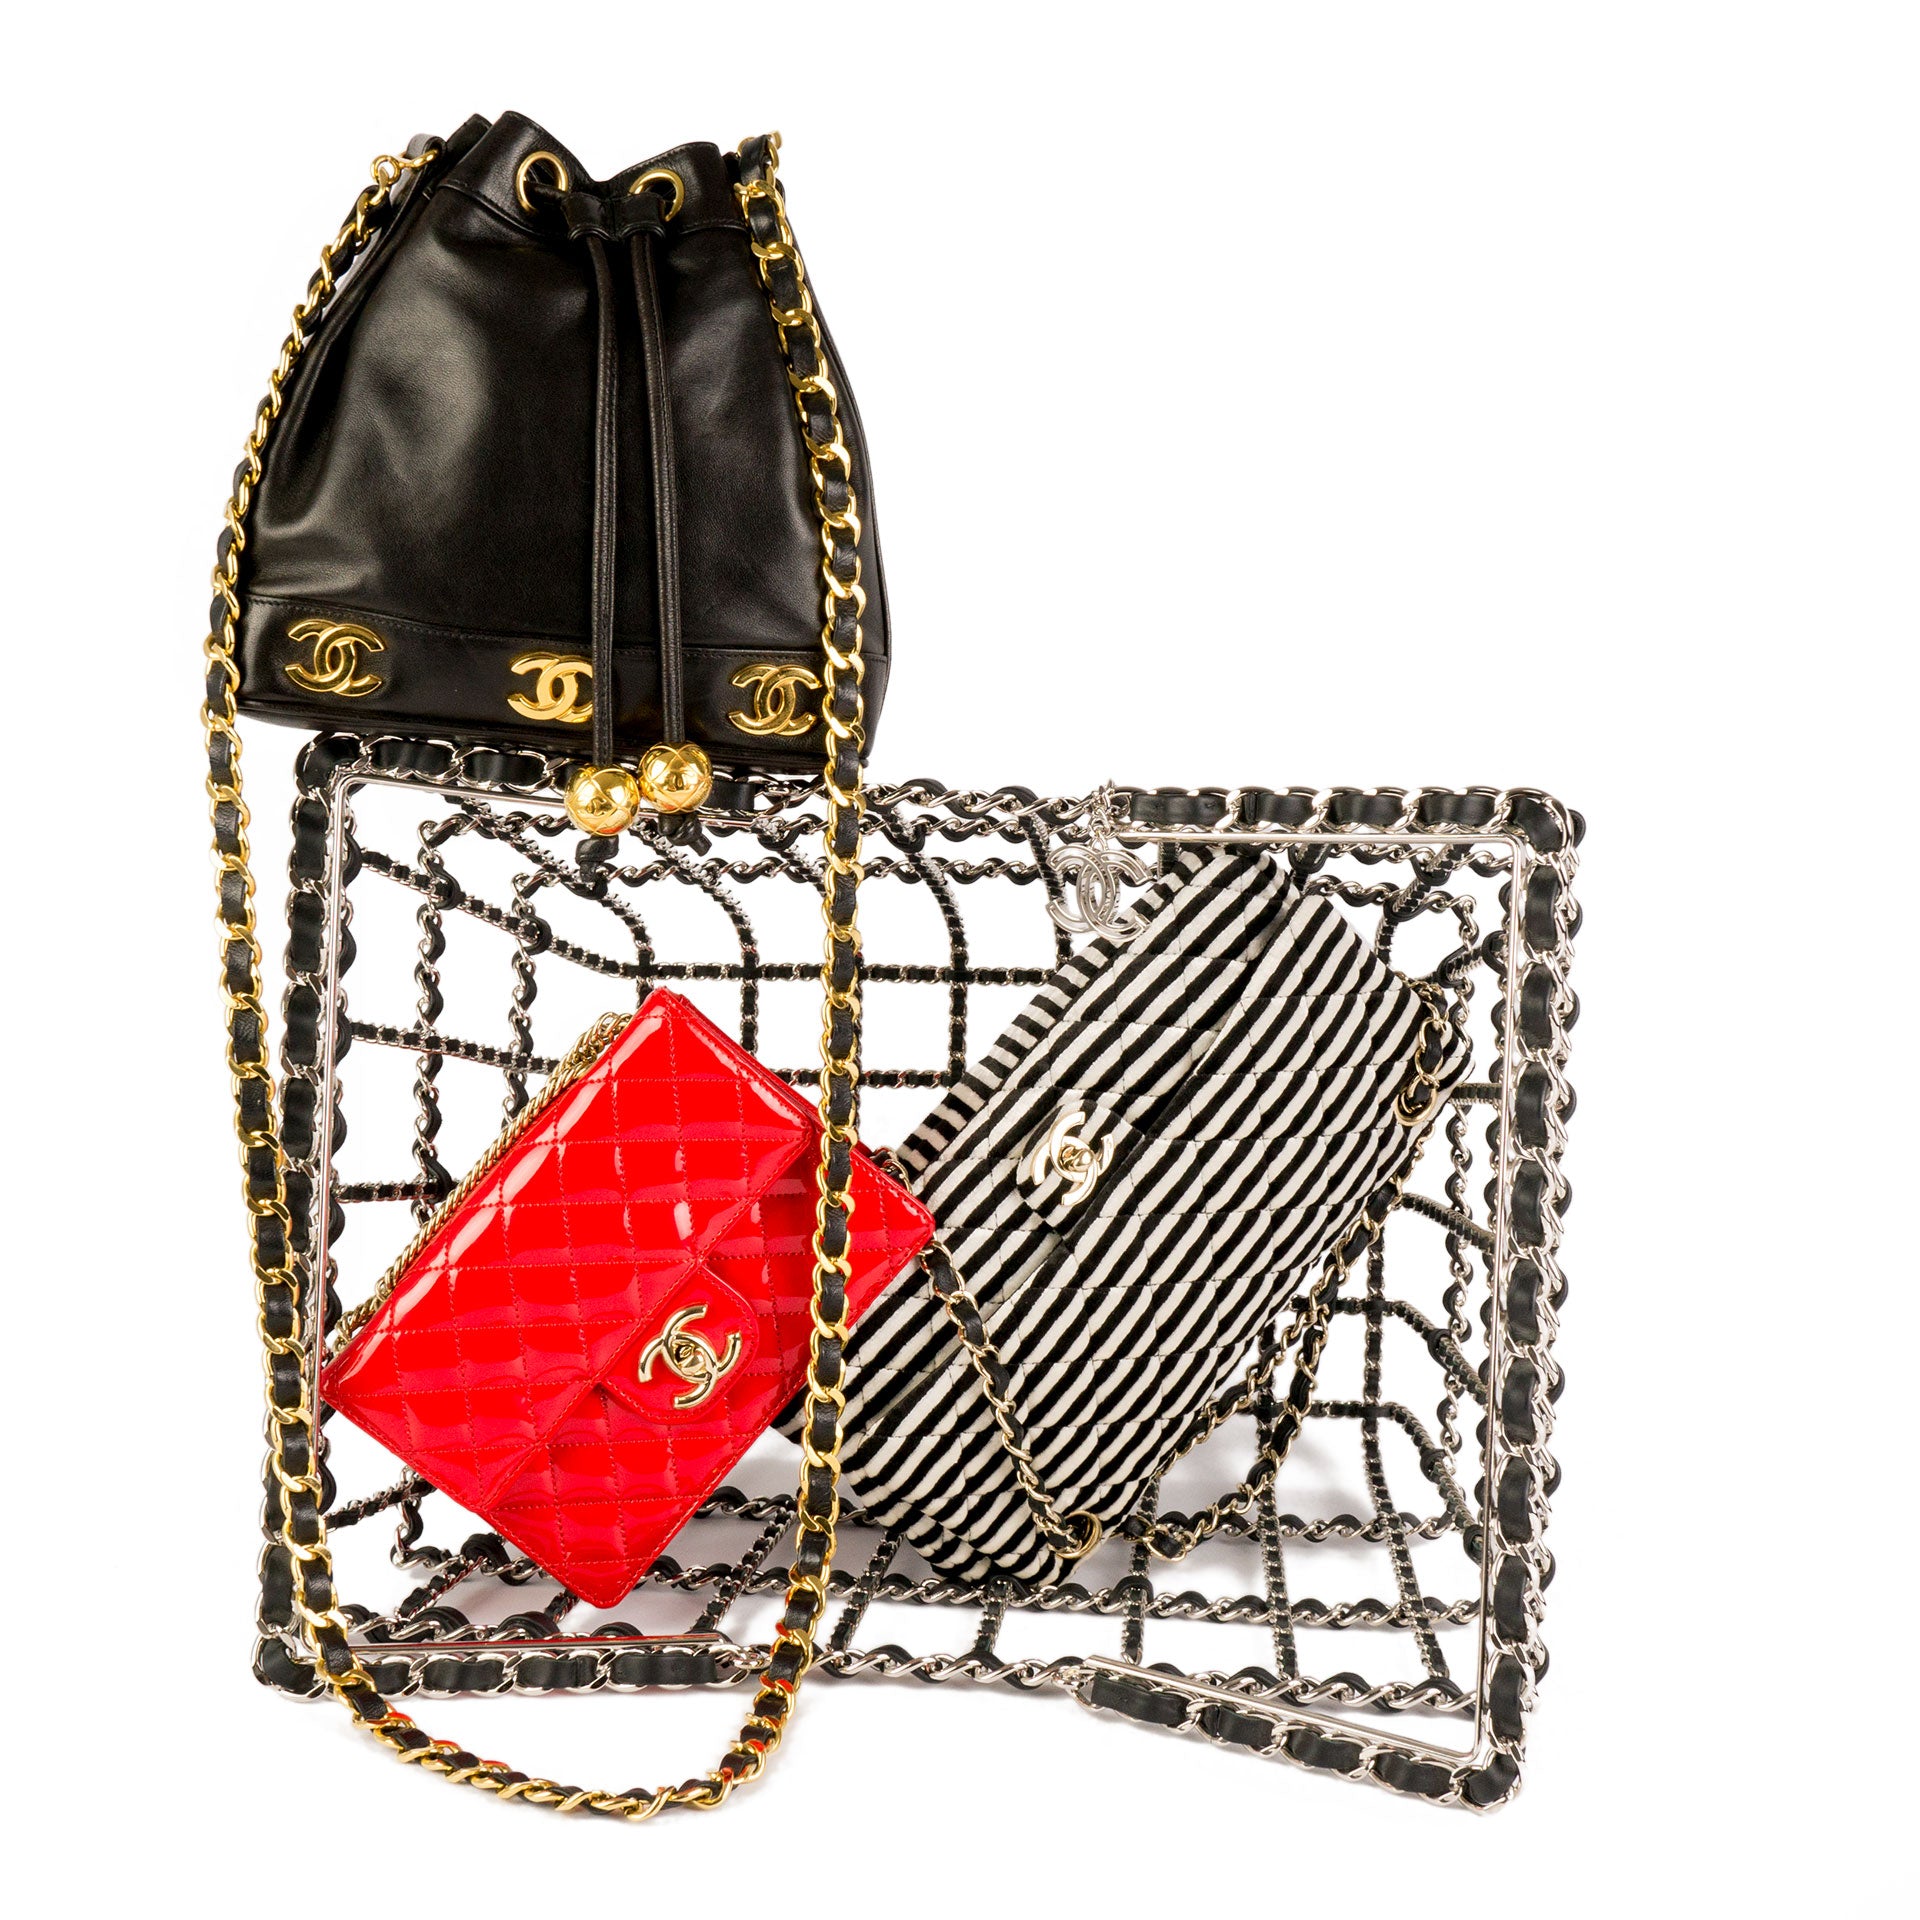 Would you pay $12,500 for this Chanel grocery BASKET?